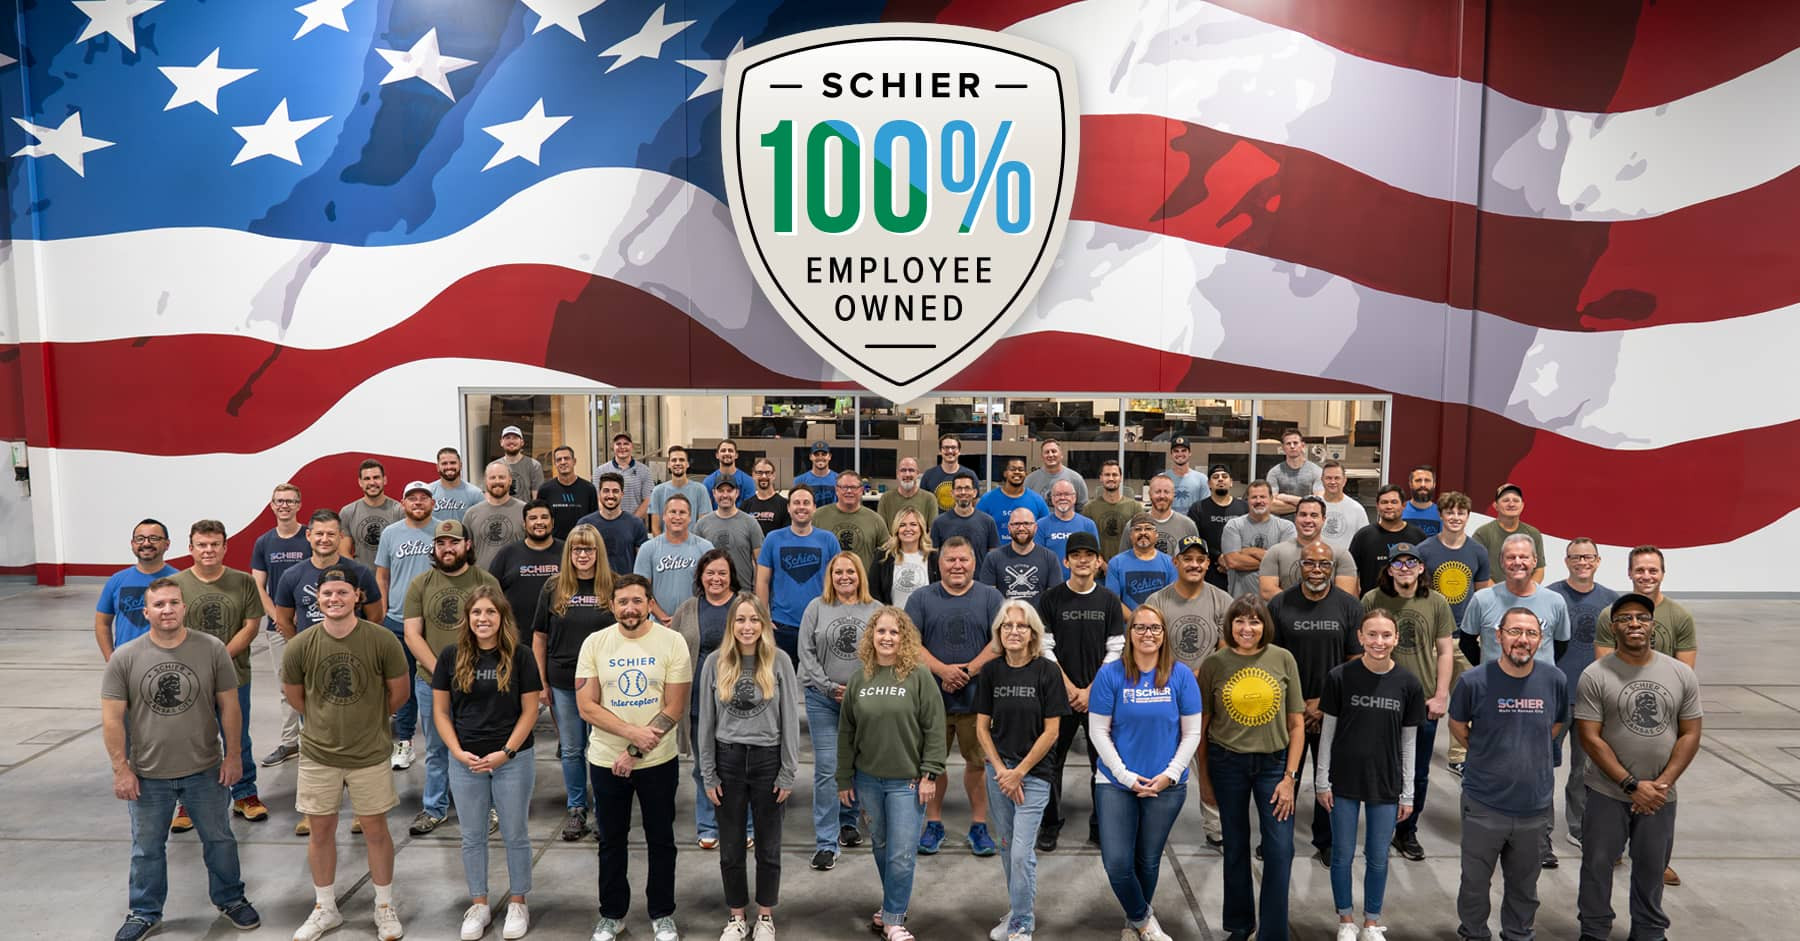 Schier is now 100% employee owned! post image